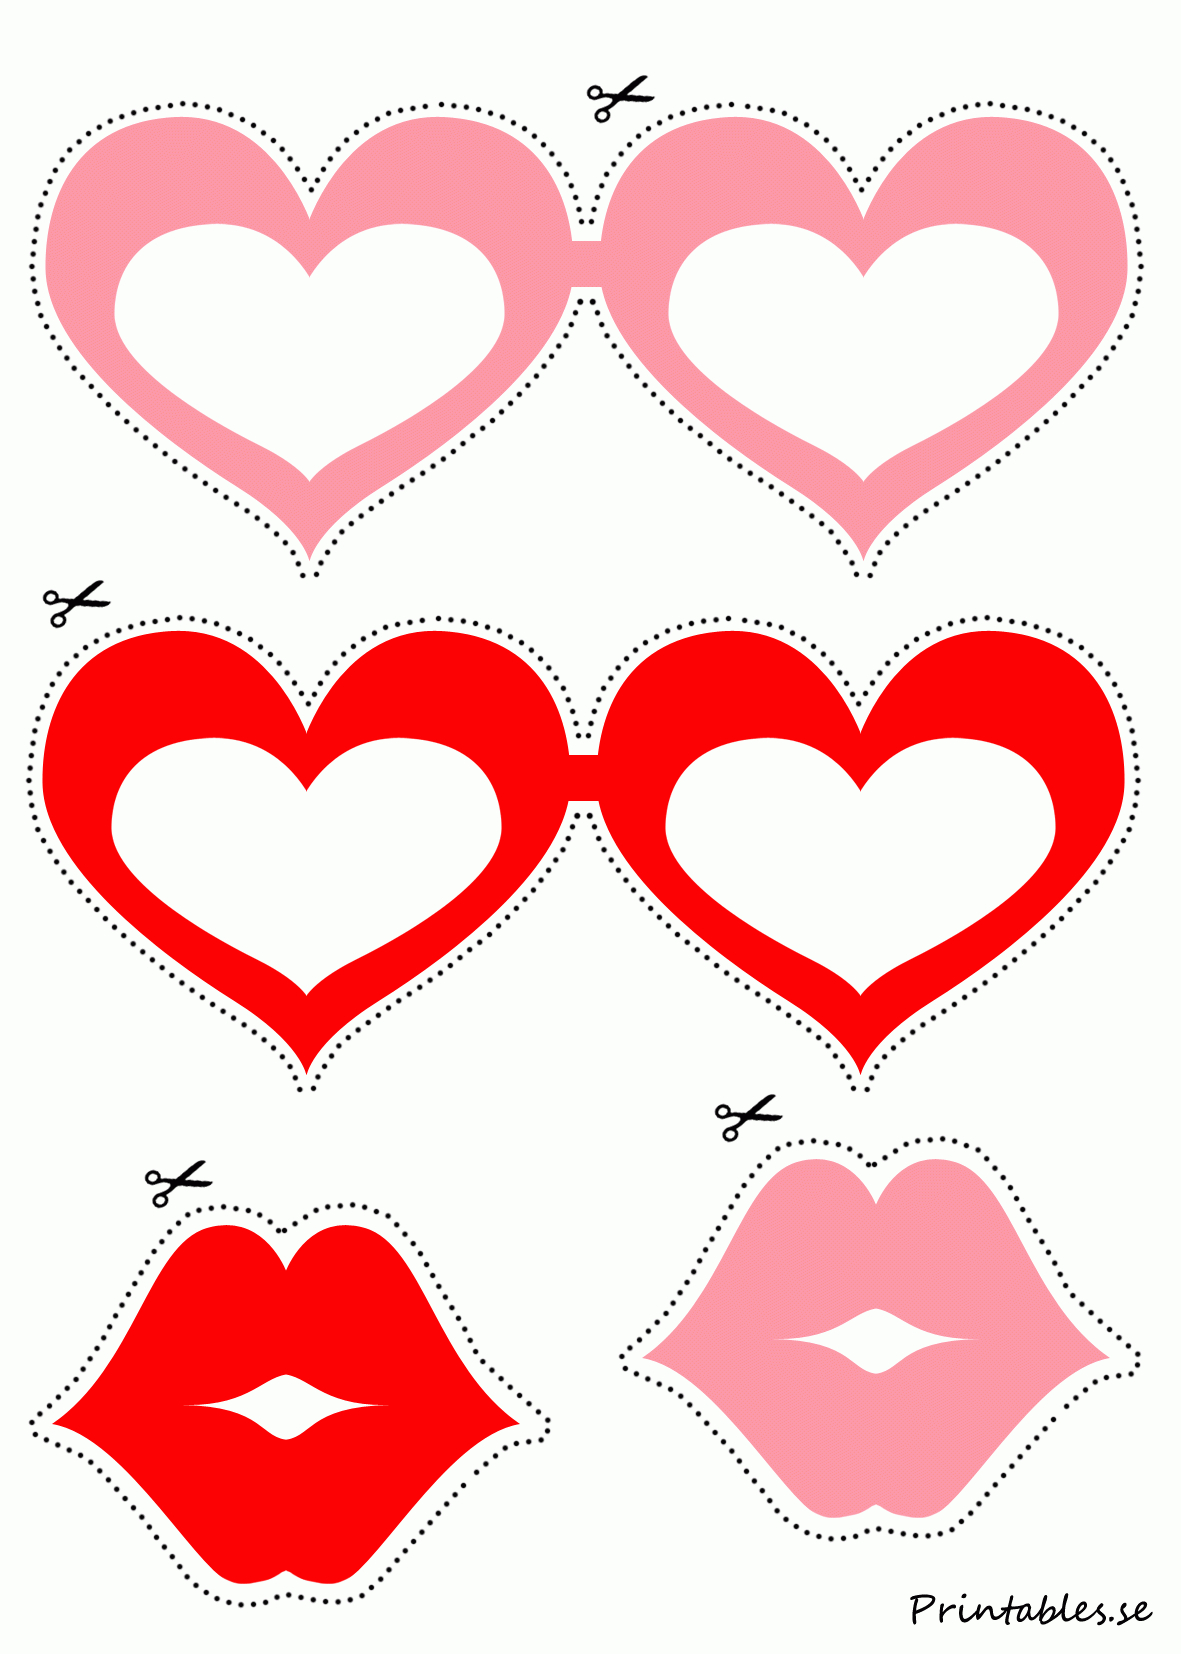 Photo Booth Props: Heart Shaped Glasses (Free Printable) - Free Printable Photo Booth Props Template